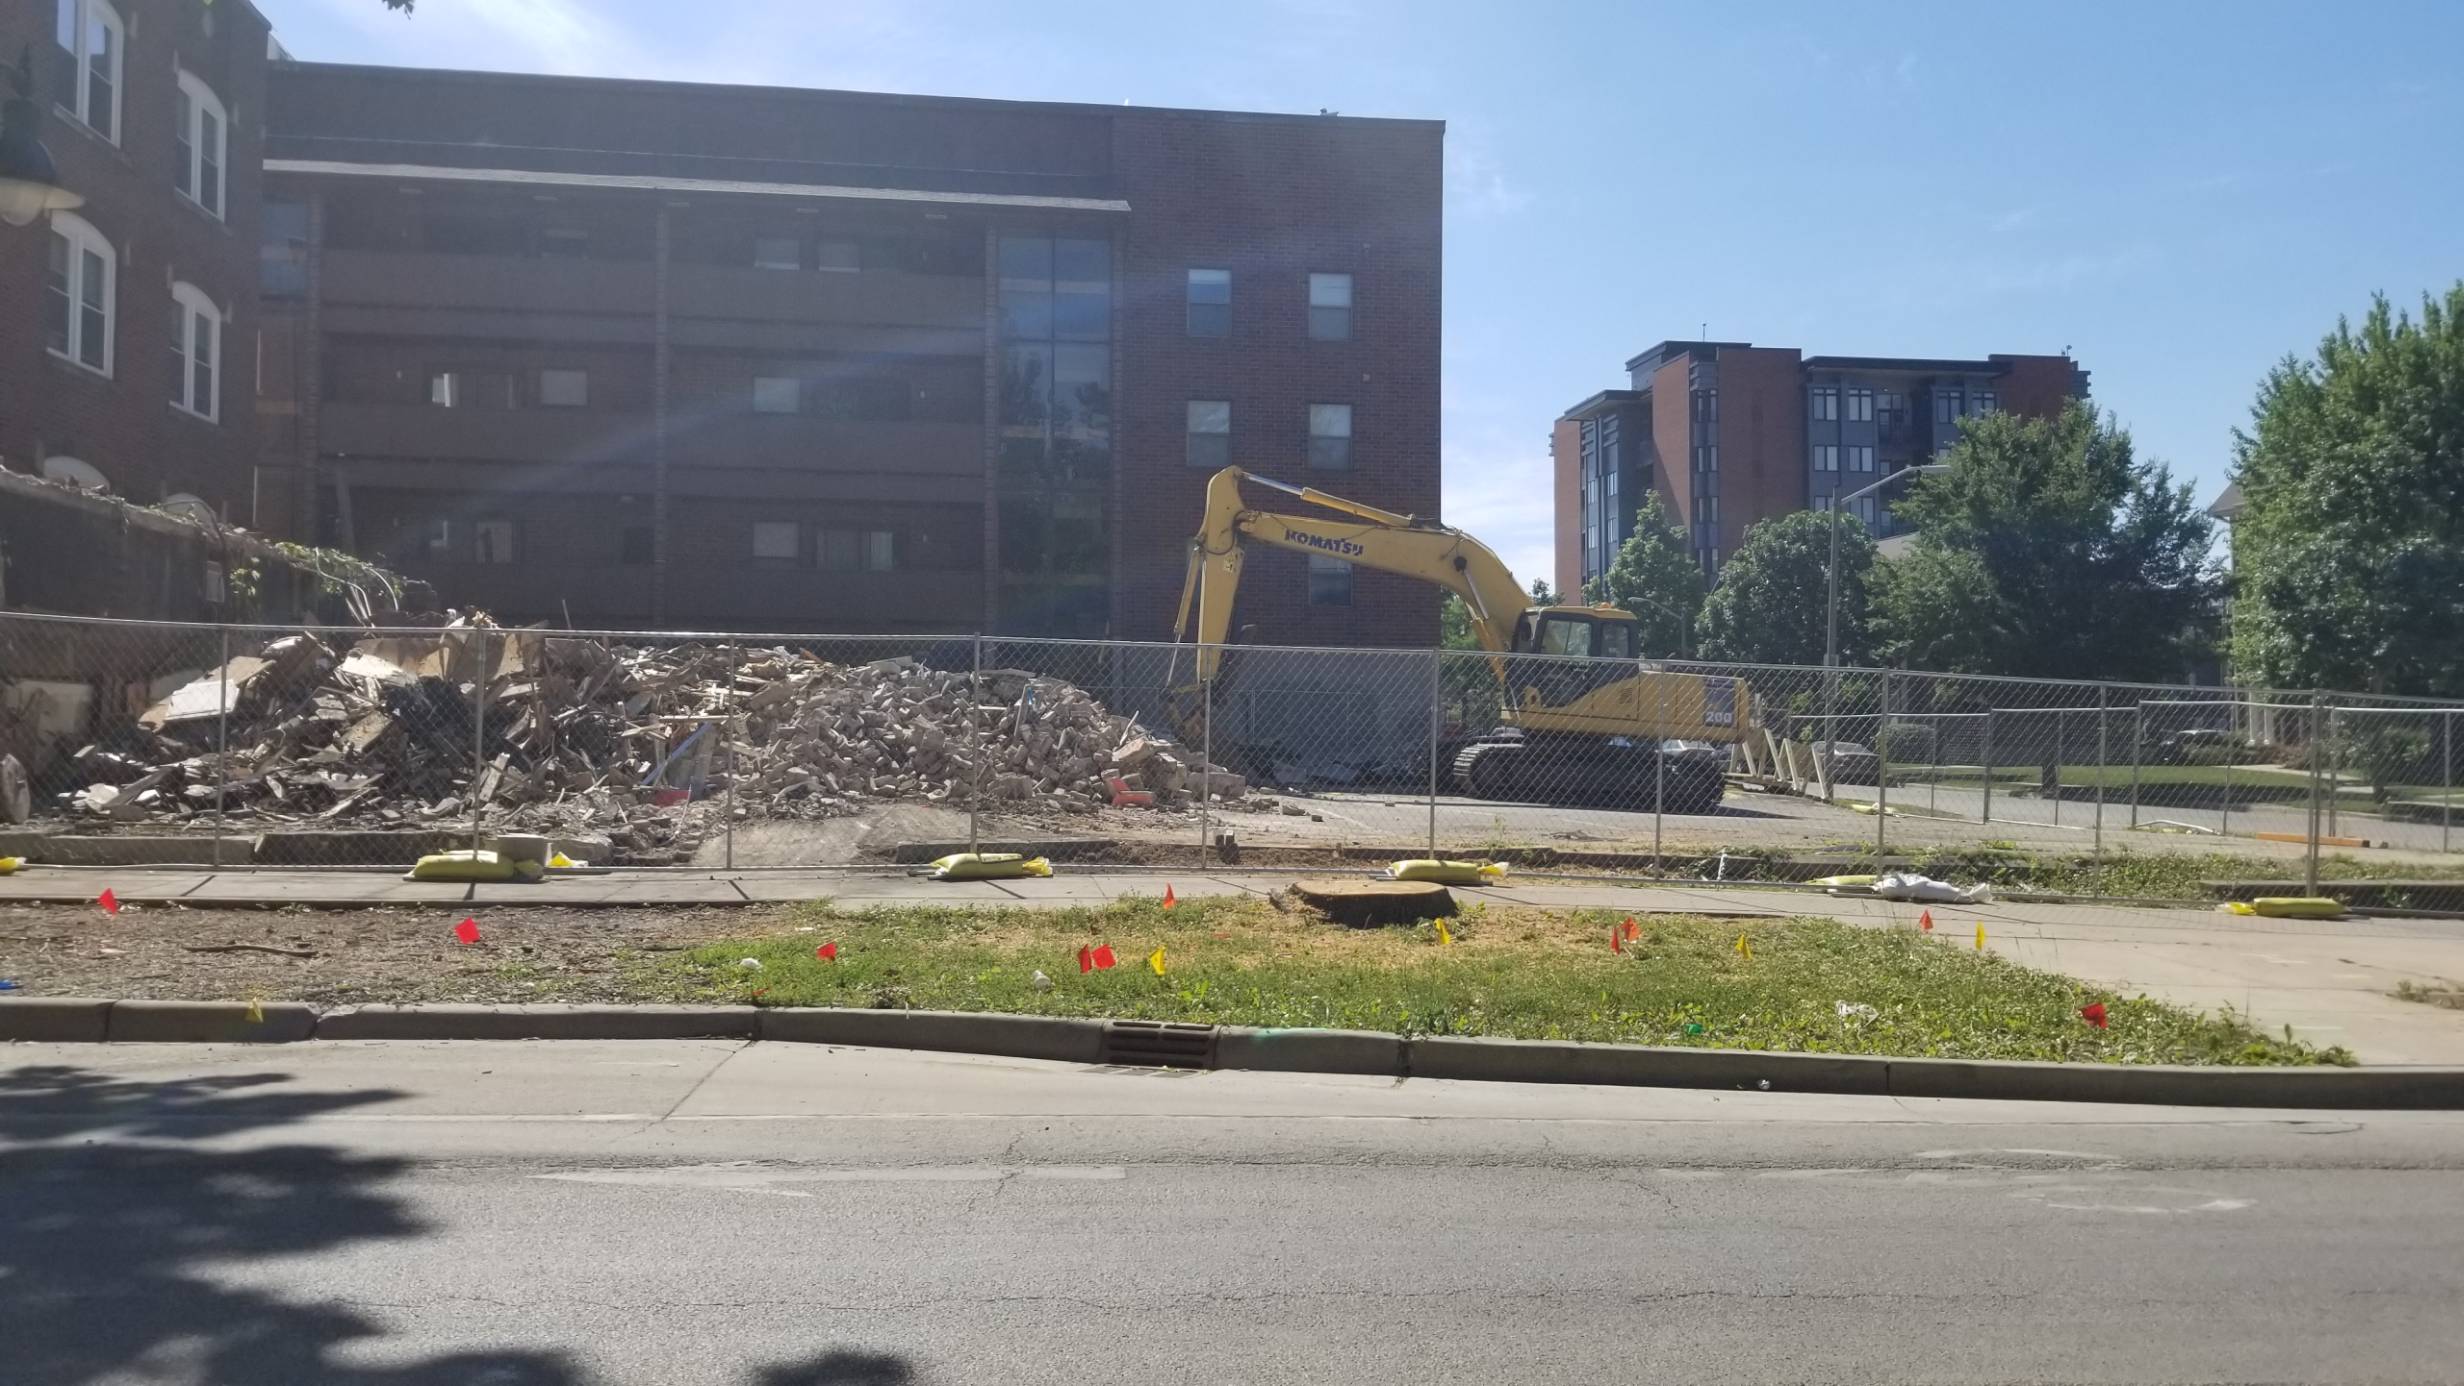 The Illini Inn was demolished this morning